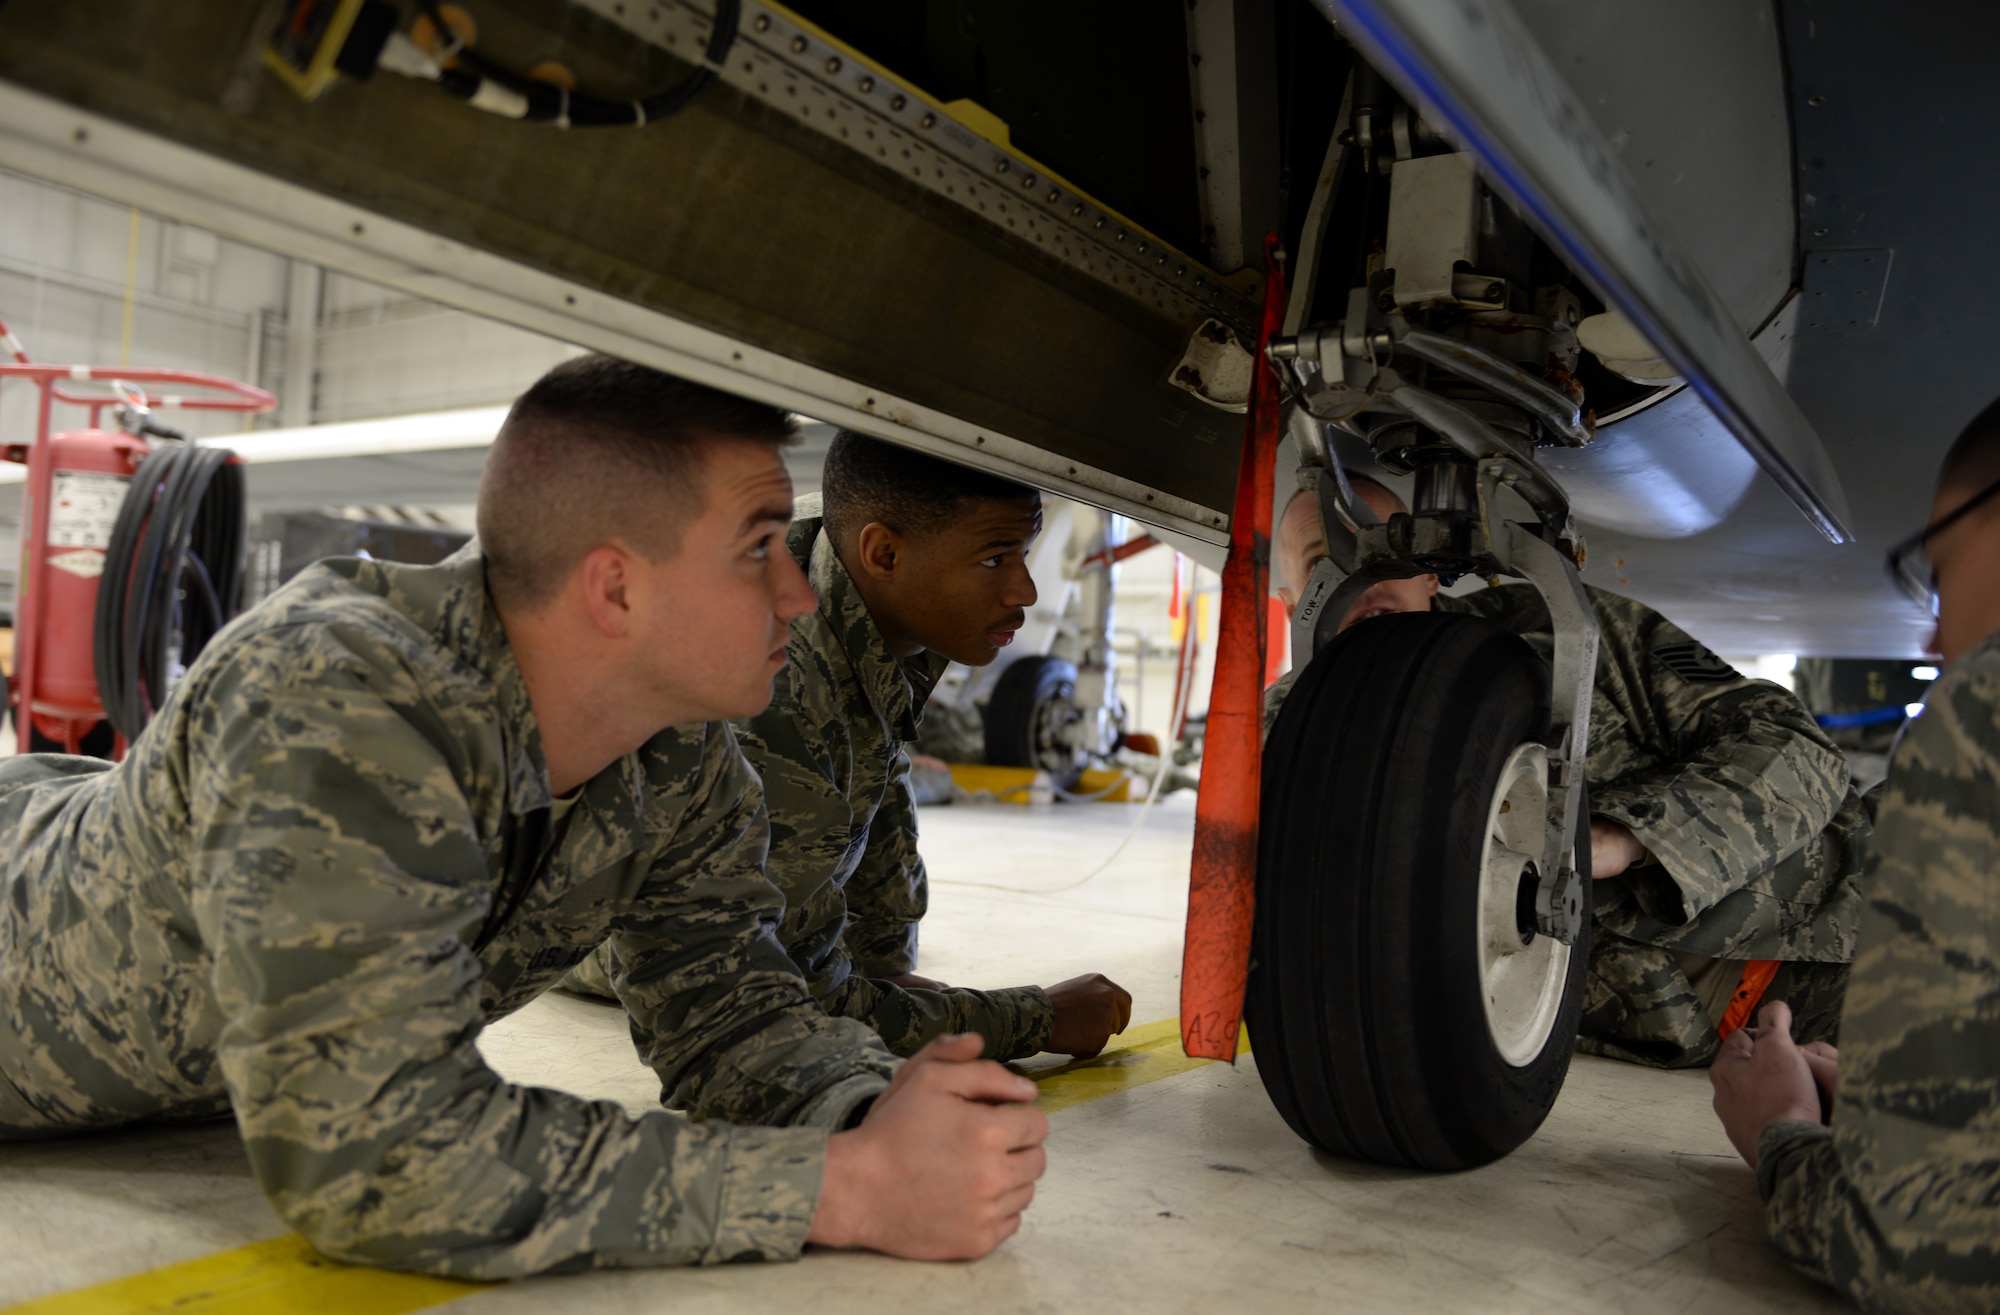 Airmen with the 372nd Training Squadron Detachment 21, inspect the landing gear of a RQ-4 Global Hawk Jan. 20, 2015, at Beale Air Force Base, Calif. The Airmen are the first students to attend the RQ-4 remotely piloted aircraft maintenance course taught at Beale. (U.S. Air Force photo by Senior Airman Bobby Cummings/Released)